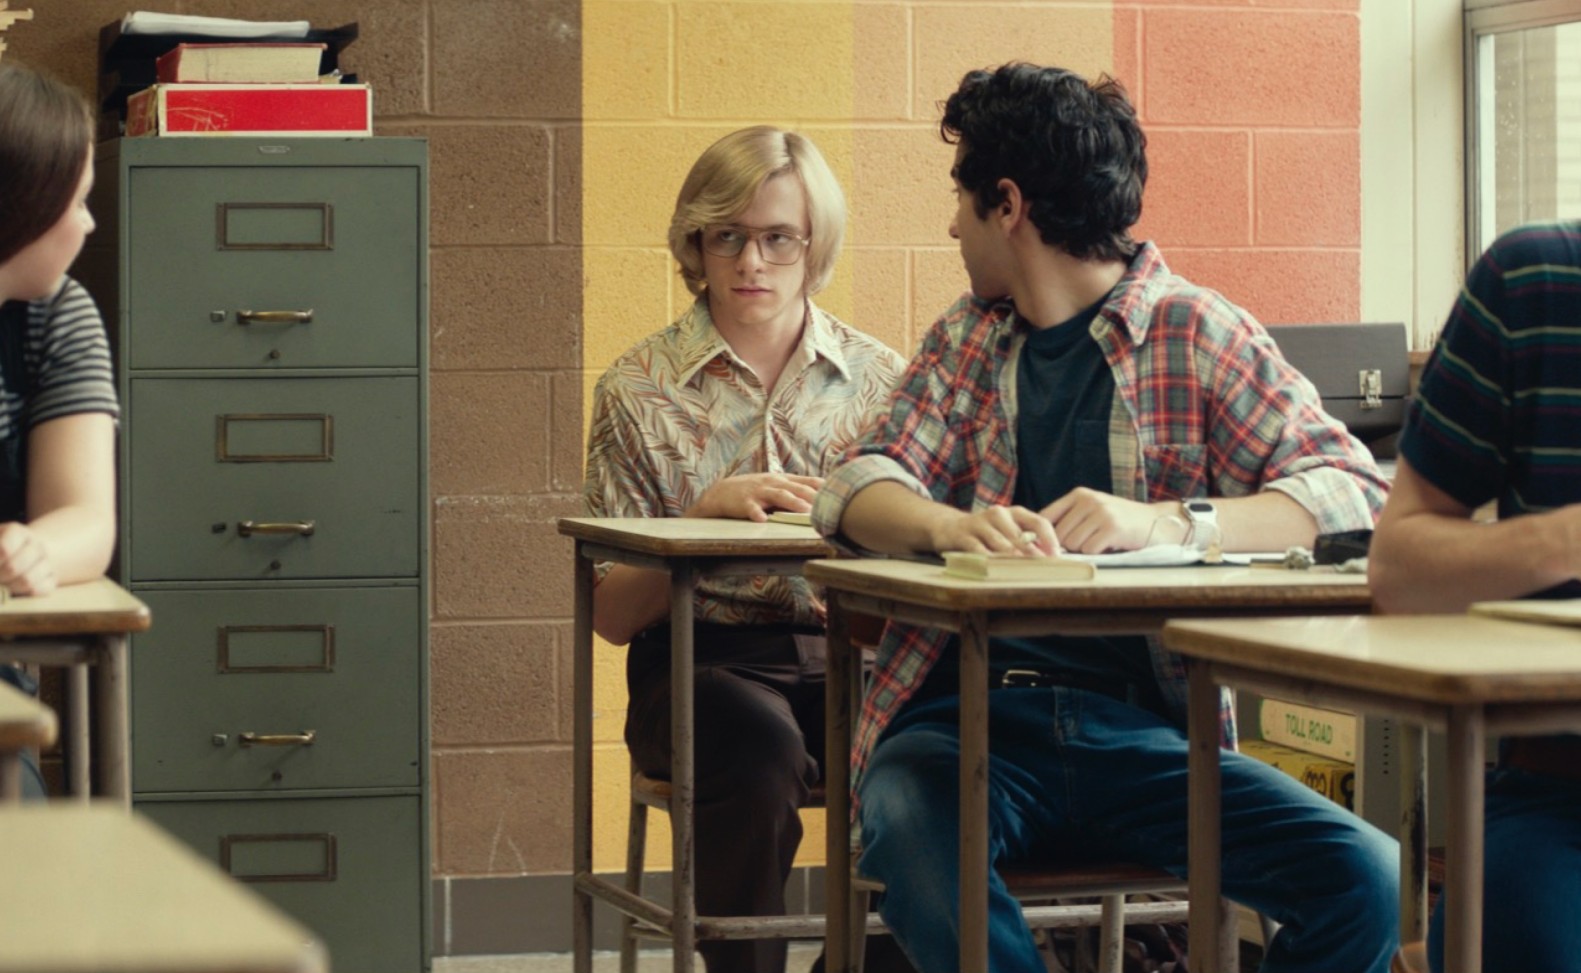 A boy turns back to another boy in class in My Friend Dahmer.